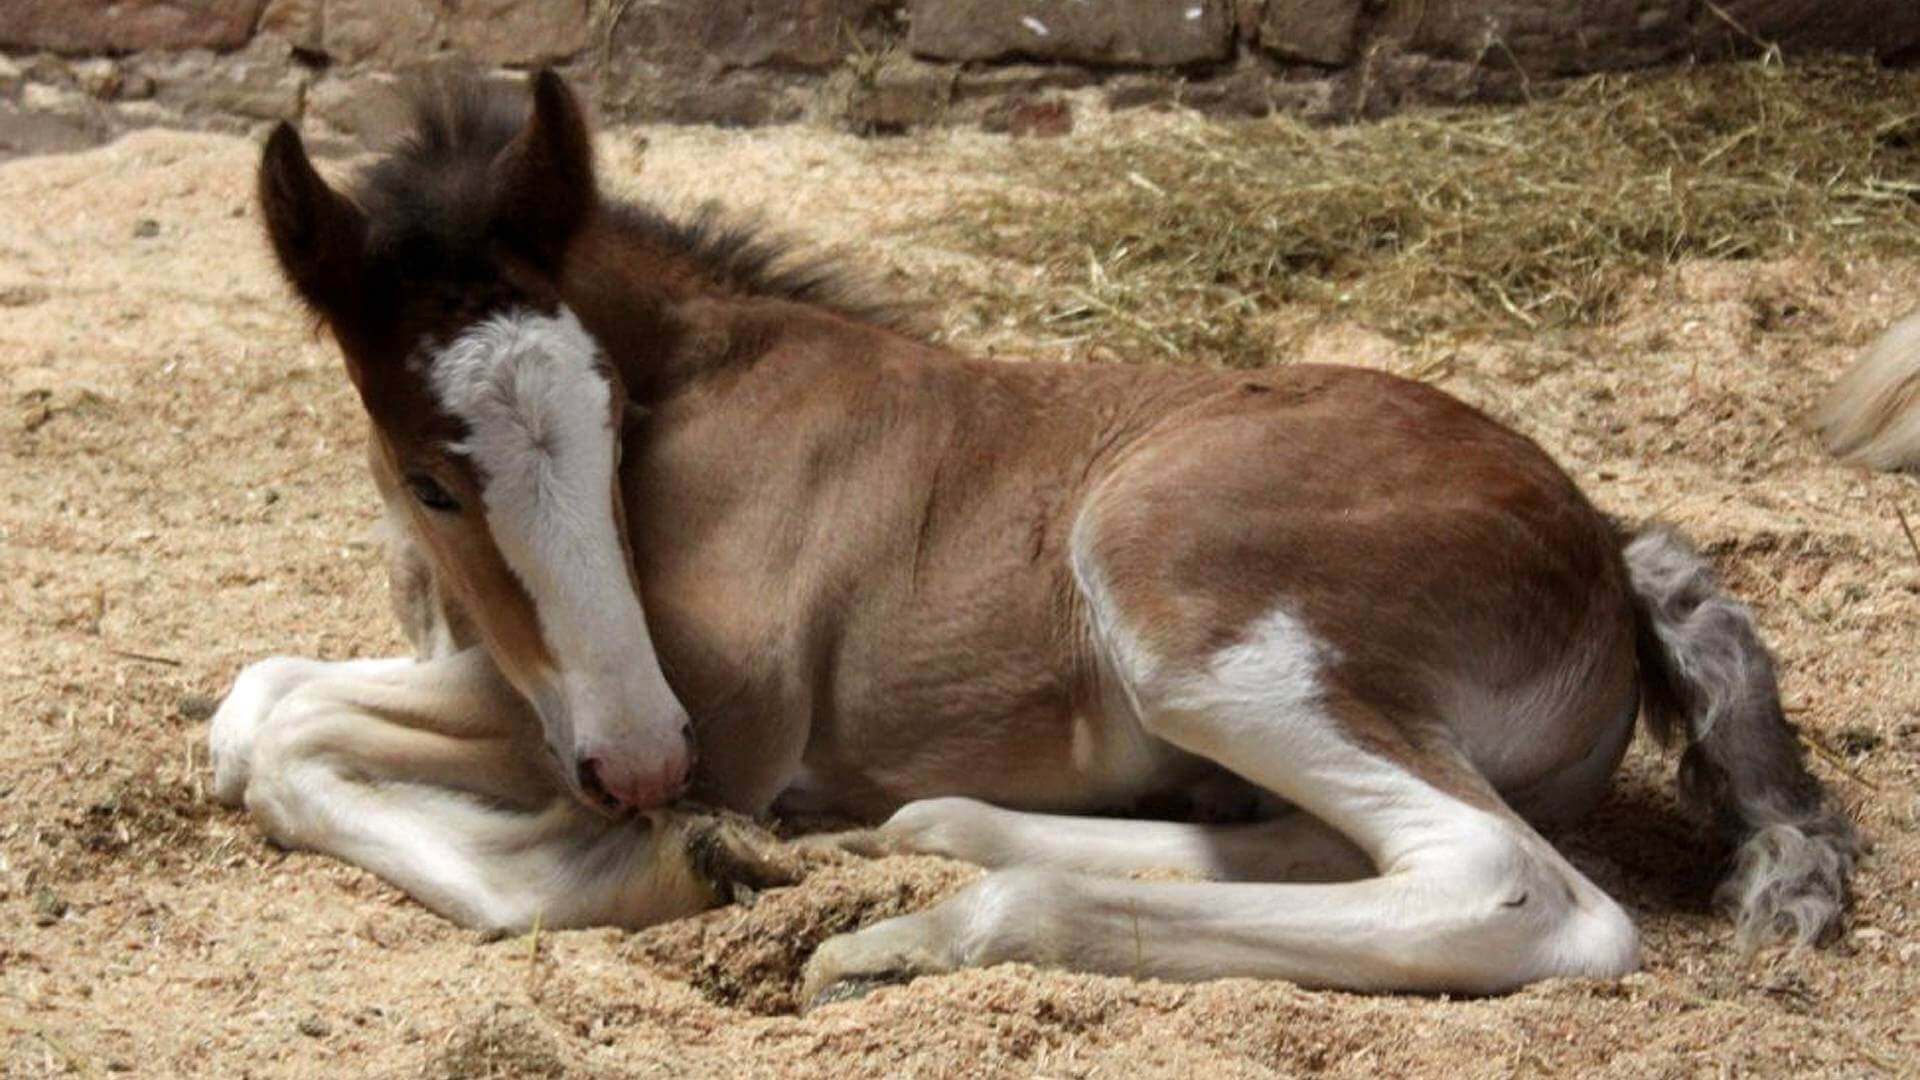 Foal in Stable